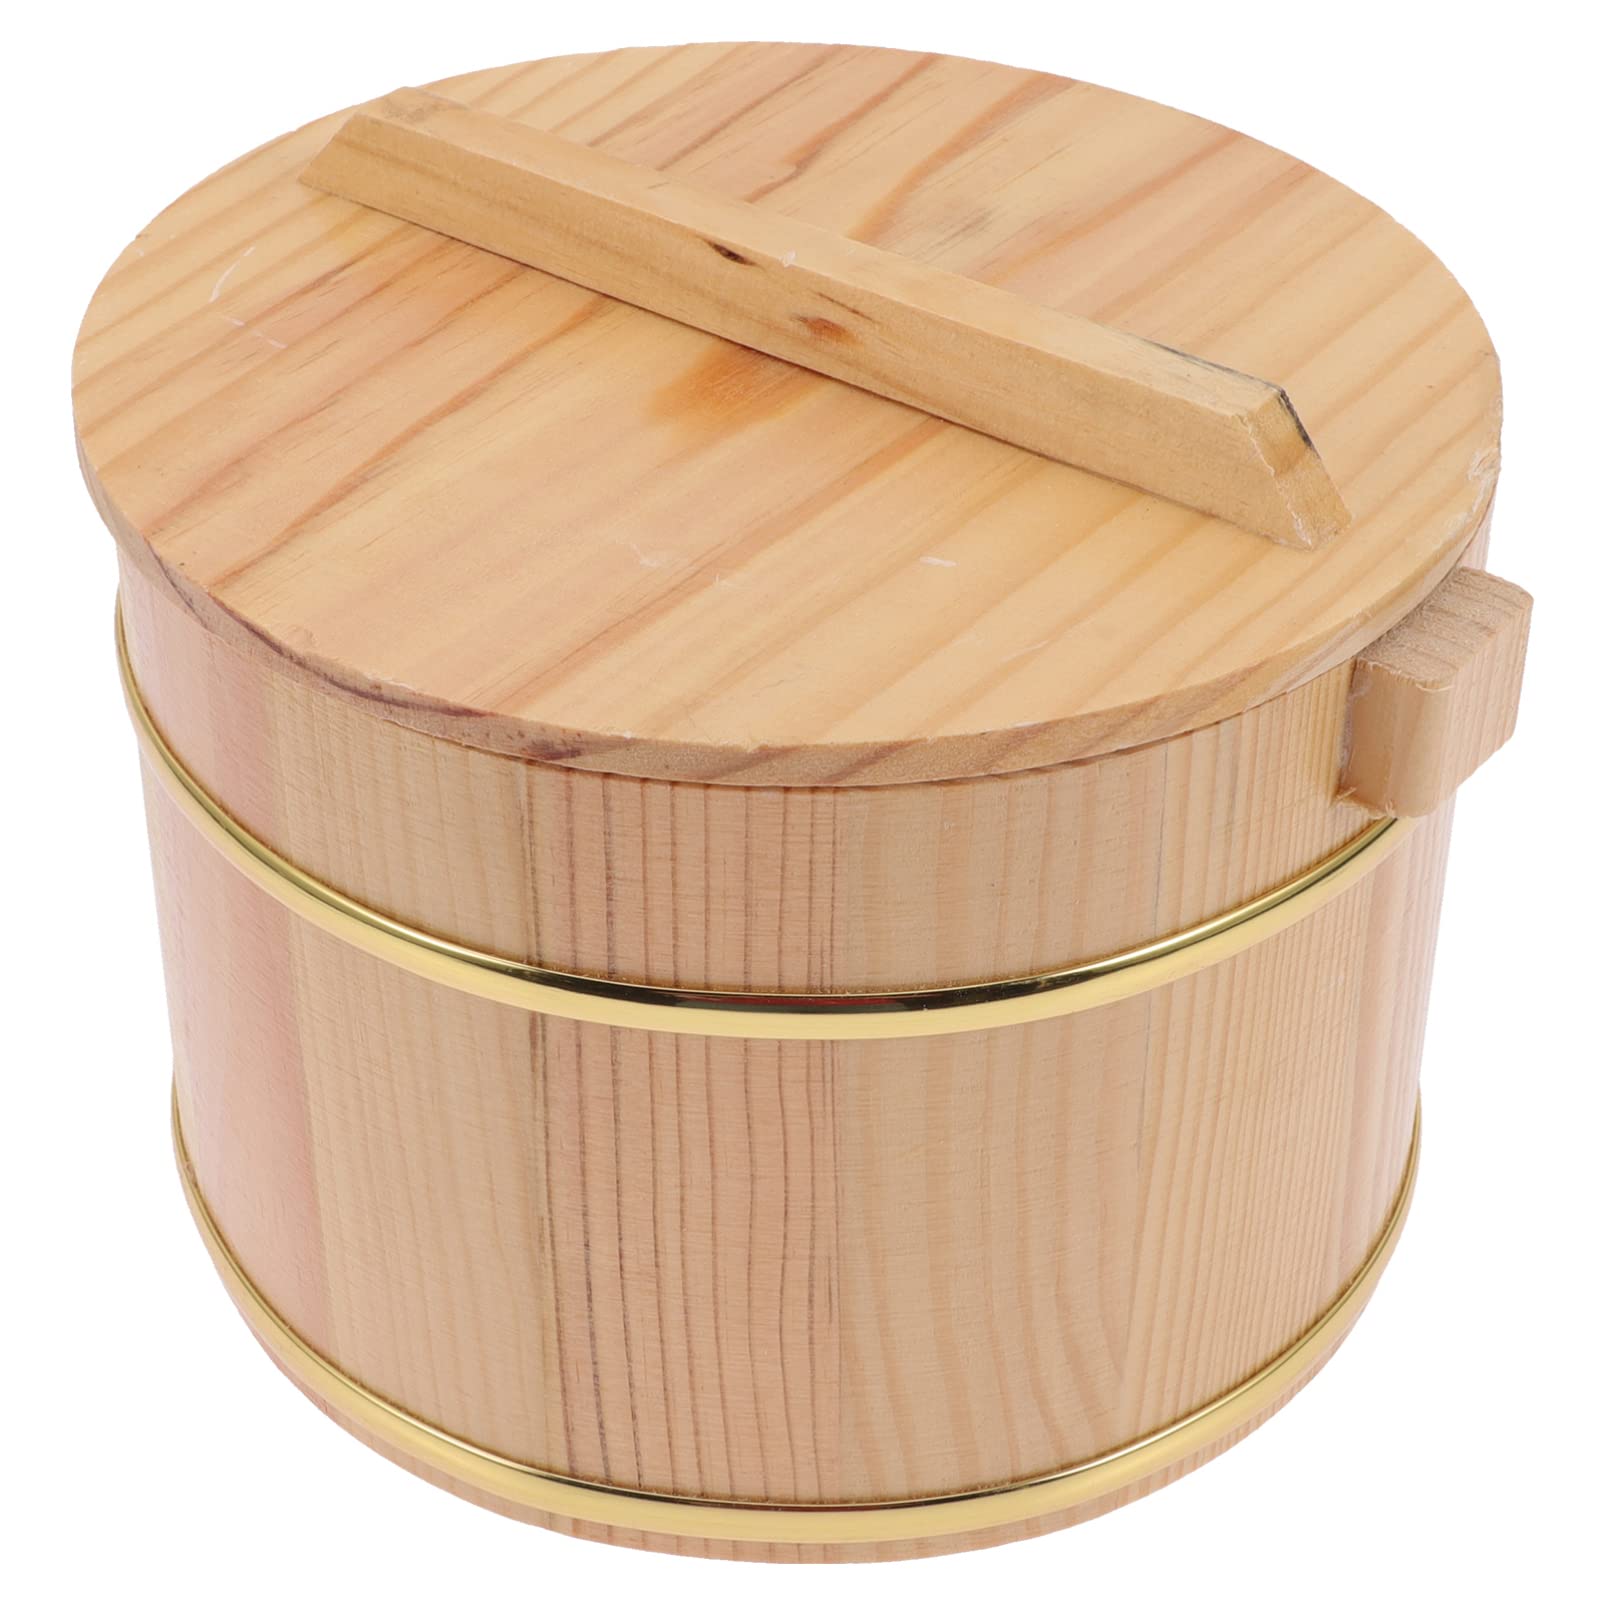 Rice Bowl Rice Bucket Wood Cooking Steamer: Wooden Steamed Cask Sushi Rice Cooling Bowl Rice Bowl Rice Cooking Tub with Lid for Home Restaurant Rice Sushi Bowl 18cm Rice Steamed Bucket